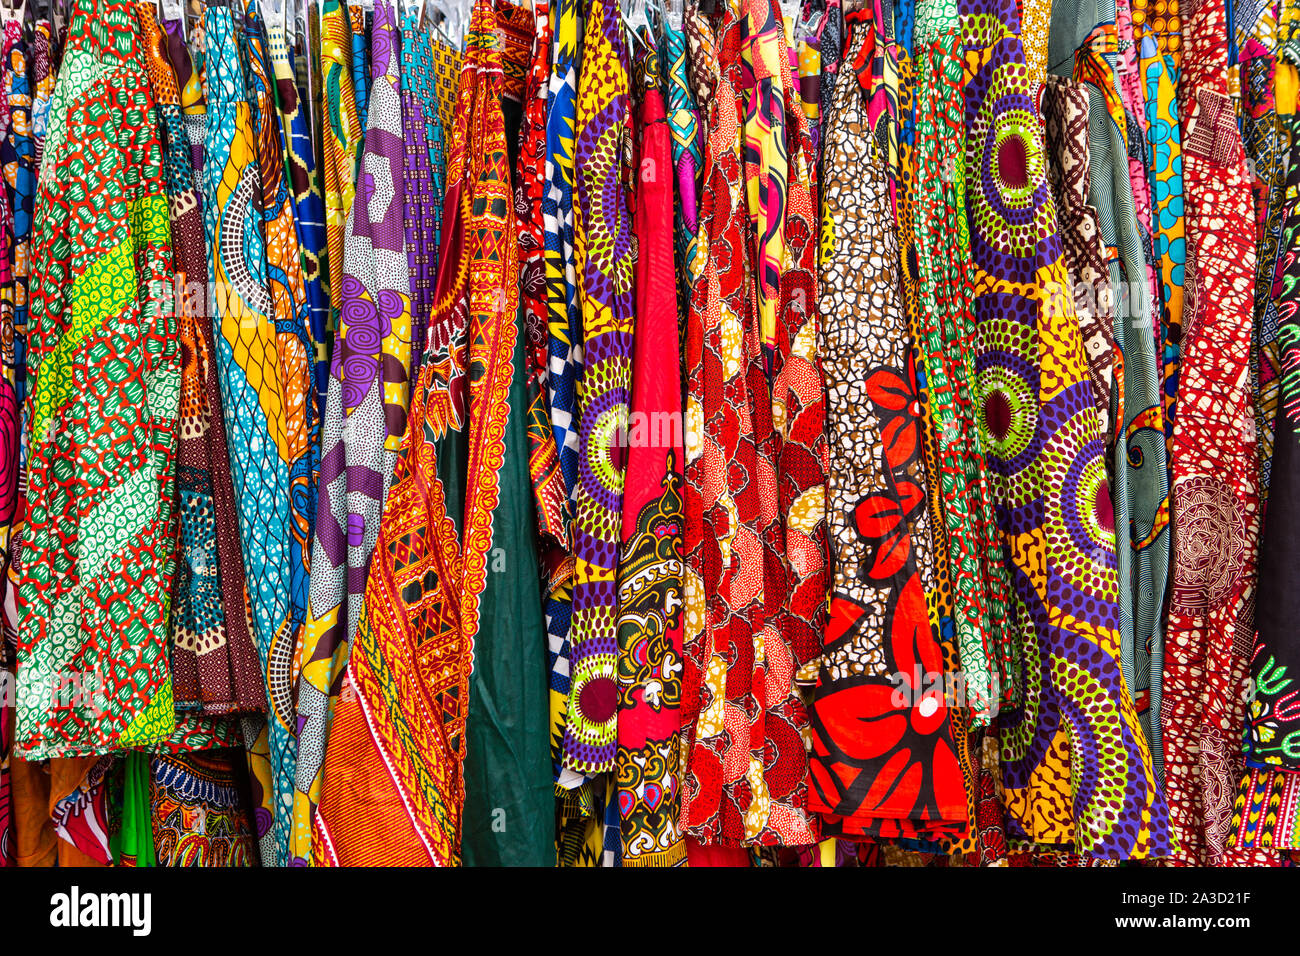 West African apparel for sale at an outdoor market Stock Photo